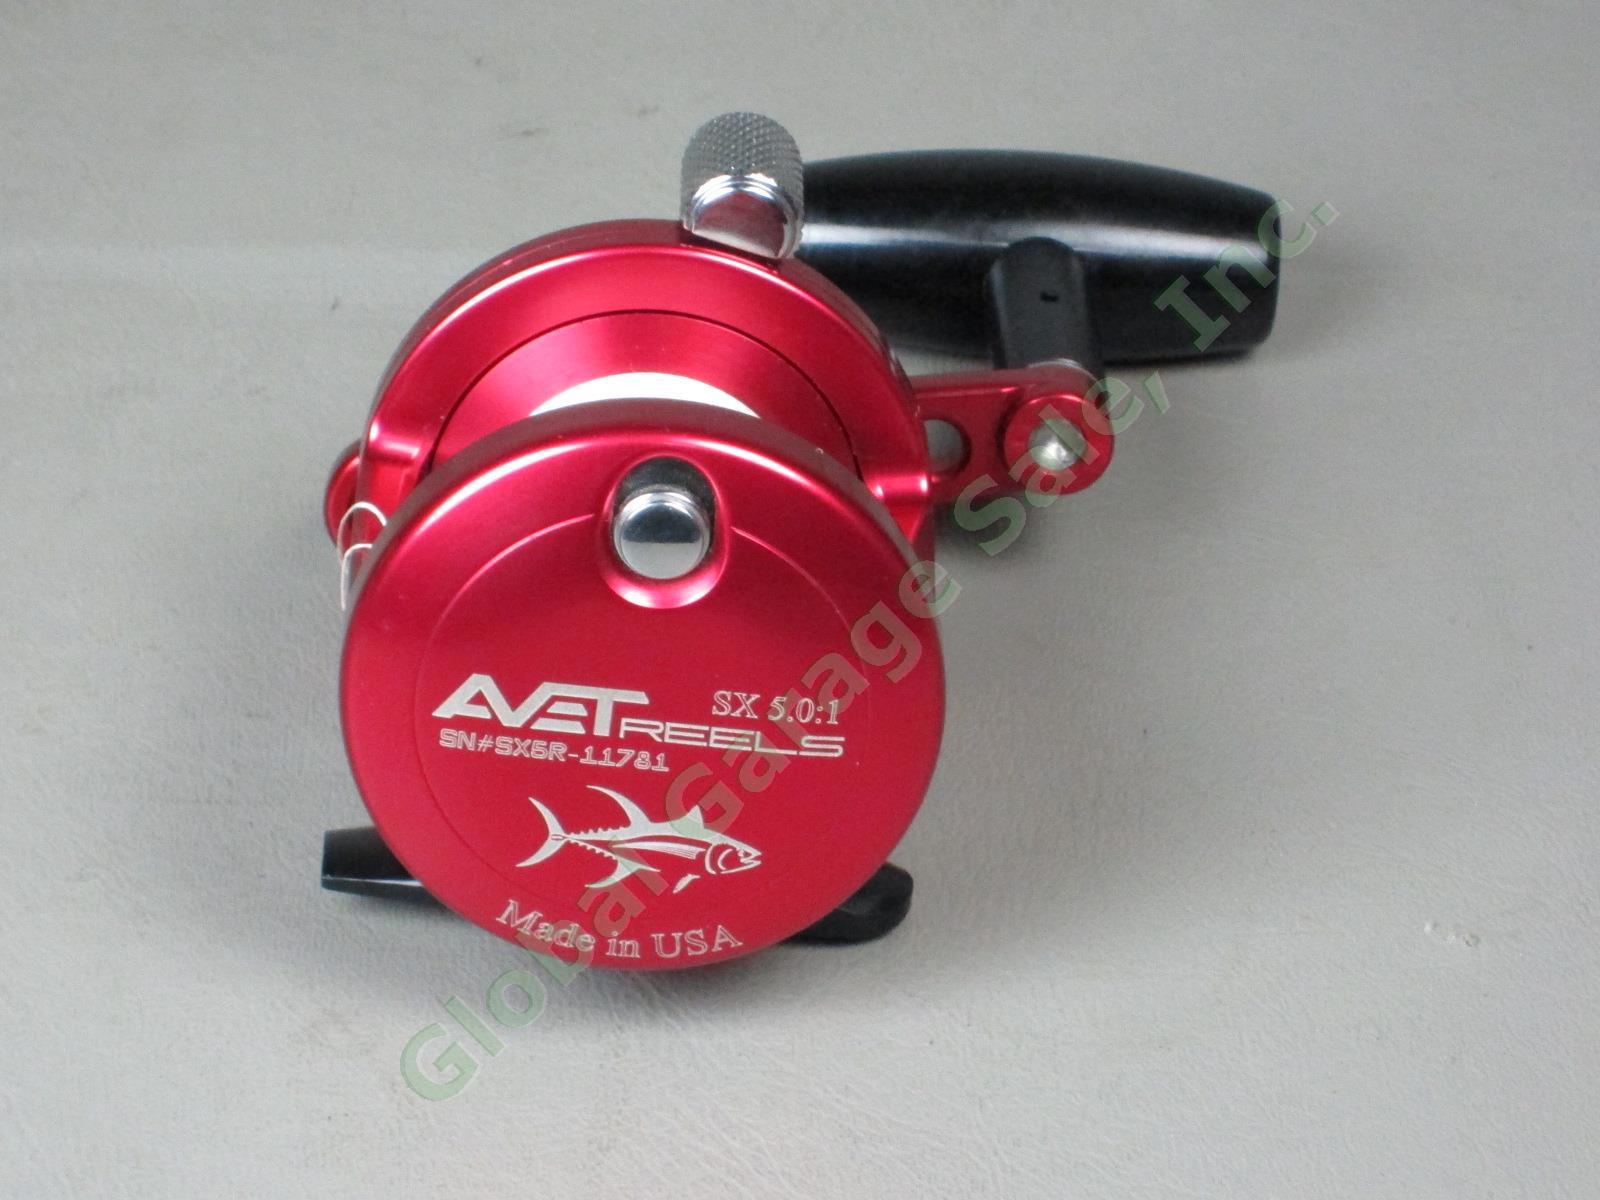 Avet SX 5.0:1 Lever Drag Saltwater Fishing Reel Made In USA Red Near Mint! NR! 4